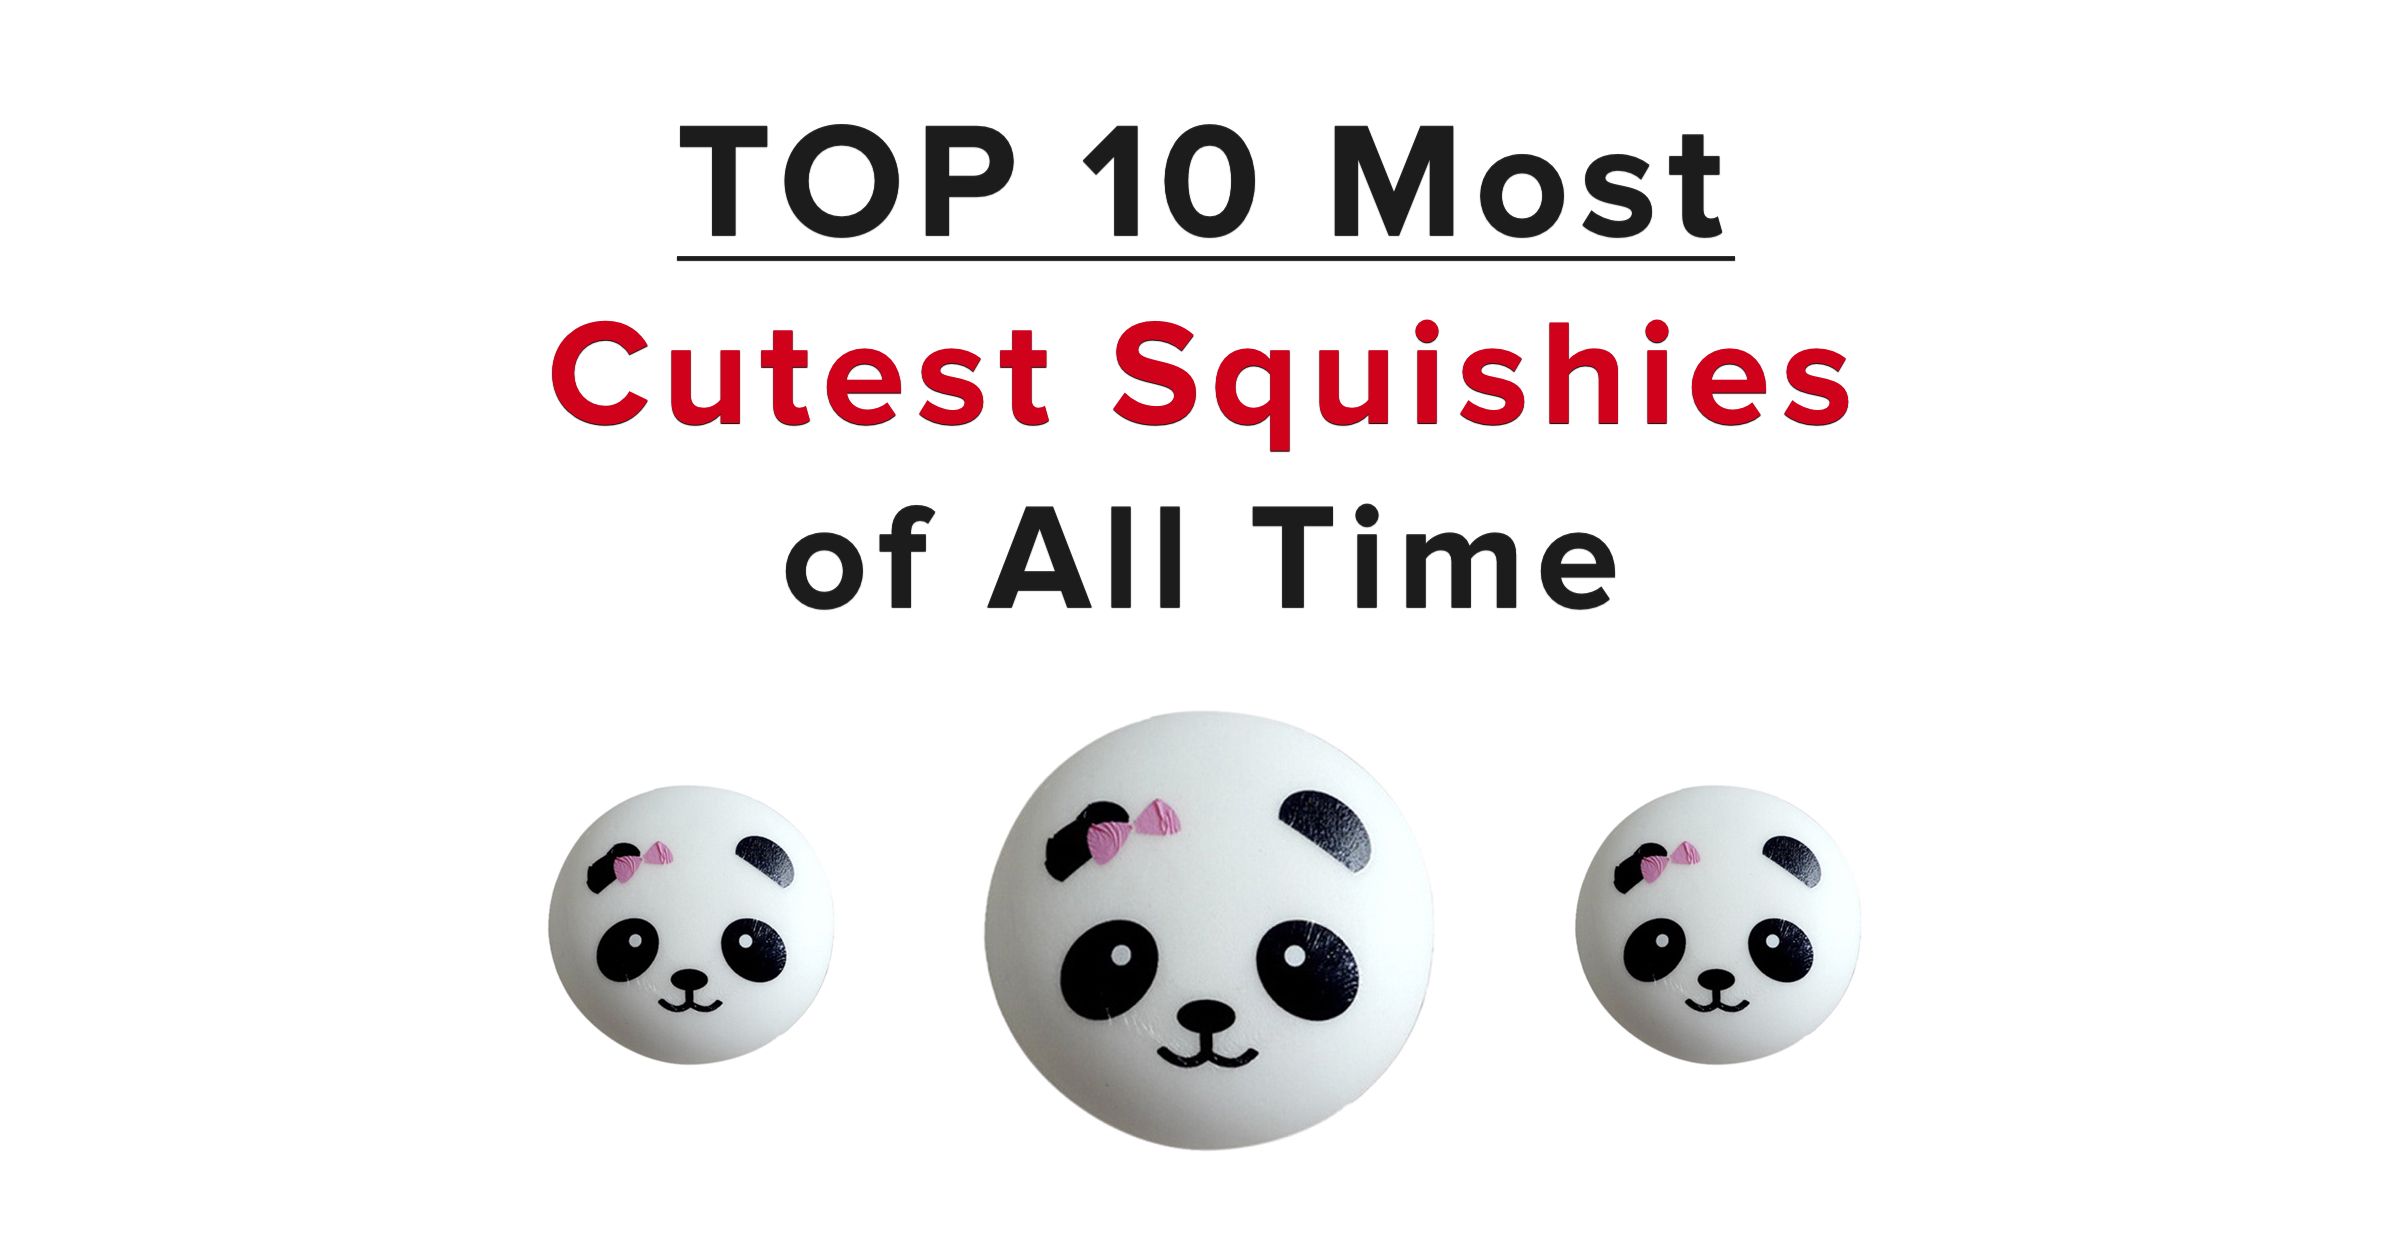 Who invented squishies? - Foodly